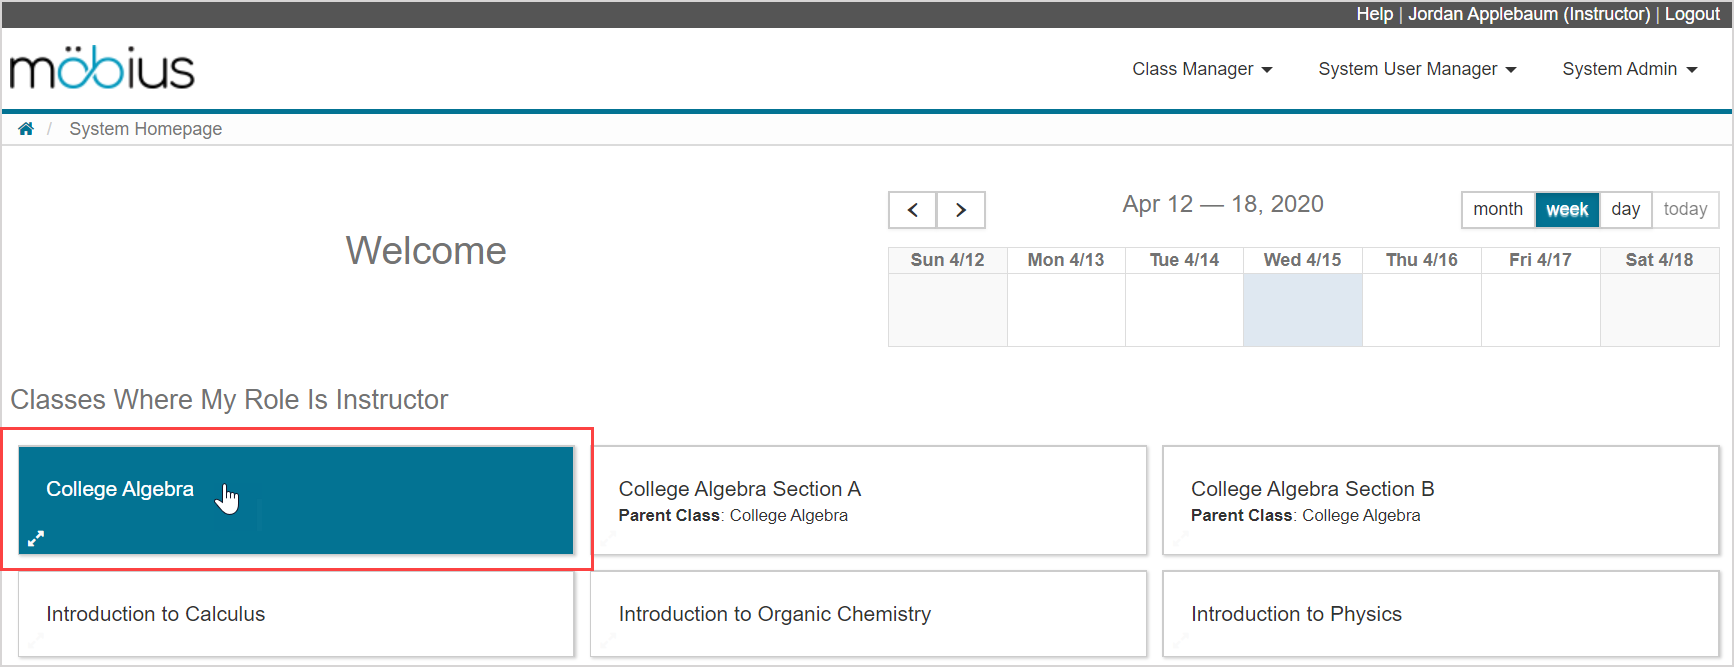 Classes that the user is enrolled in are listed on the System Homepage under the Classes Where My Role Is Instructor heading.